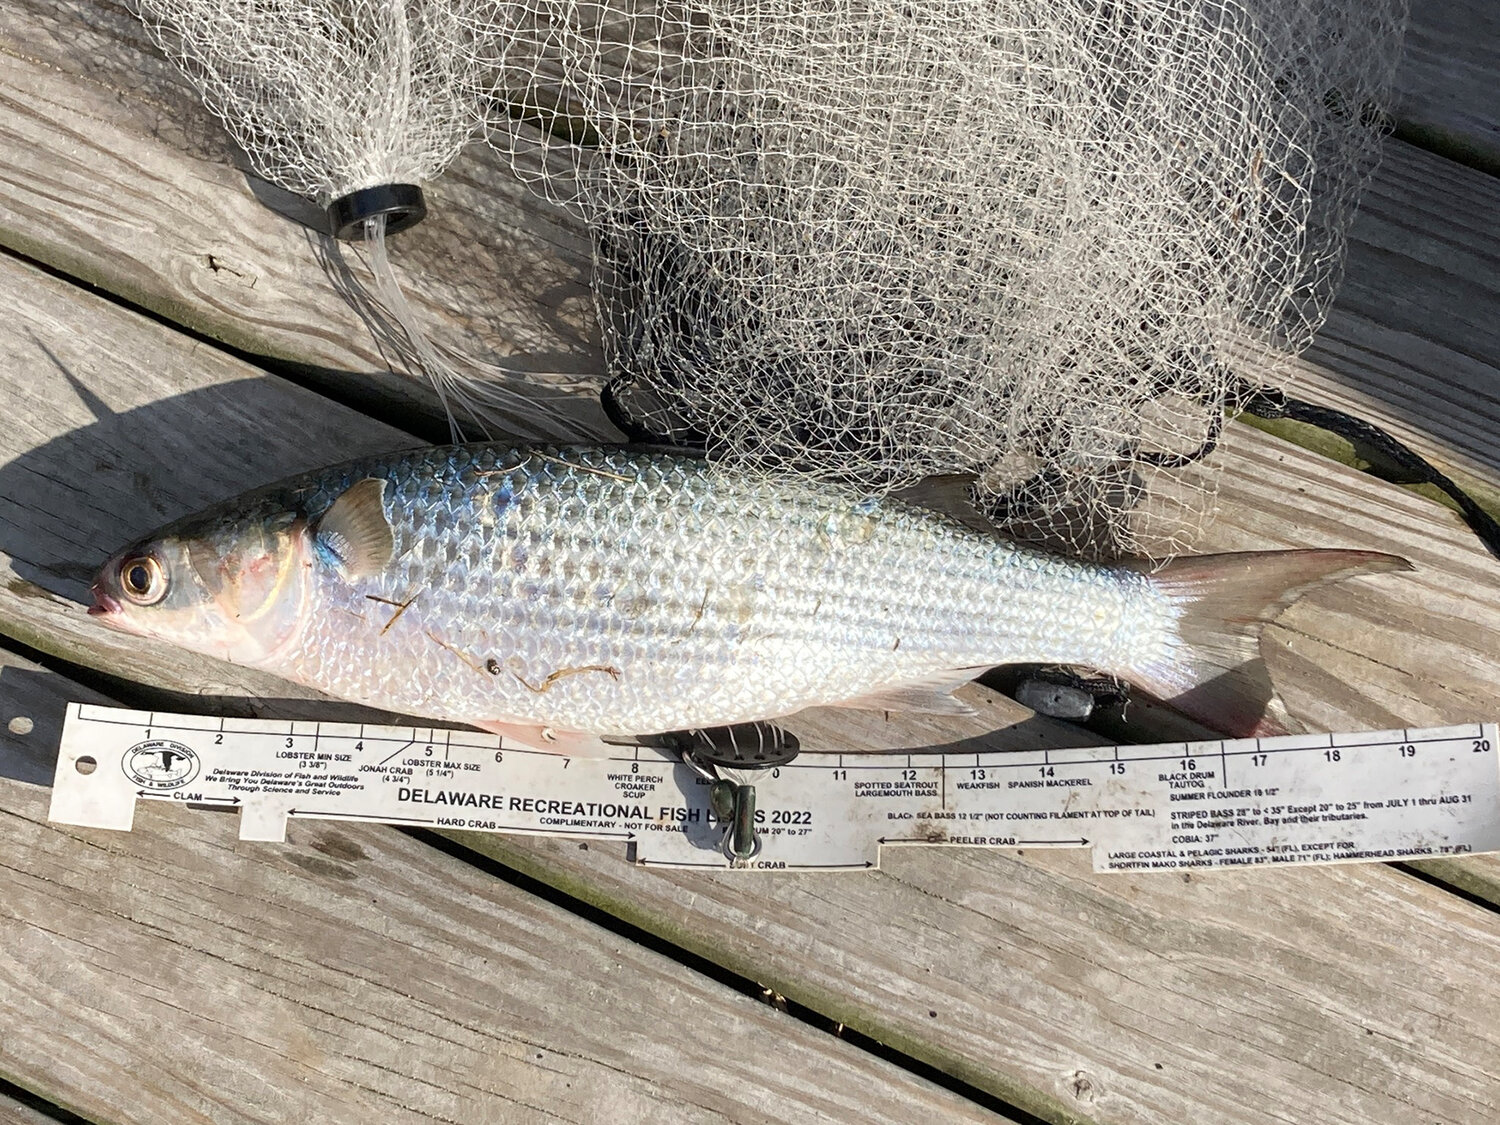 George Frigm netted this beast of a mullet, or cob mullet, in the Assawoman Bay. Mullet rigs will be the rig of choice soon for late summer blues.